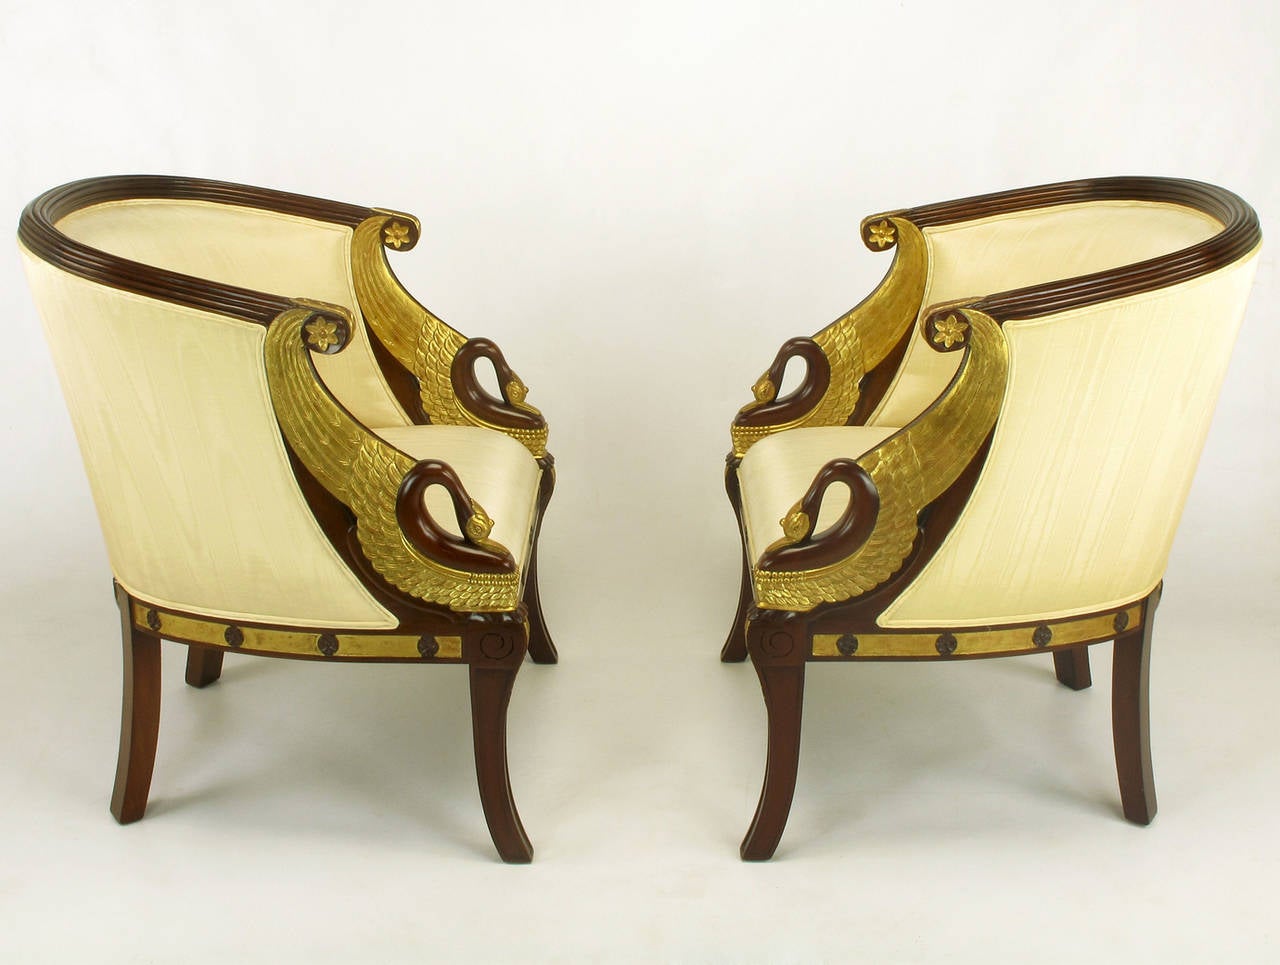 Pair of Maitland Smith Empire revival parcel-gilt bergeres with swan head and wing detail. Mahogany frames with cream silk moire upholstery. Reeded back rail, gilt apron with rosettes, gilt acanthus leaf details to the arms and legs.